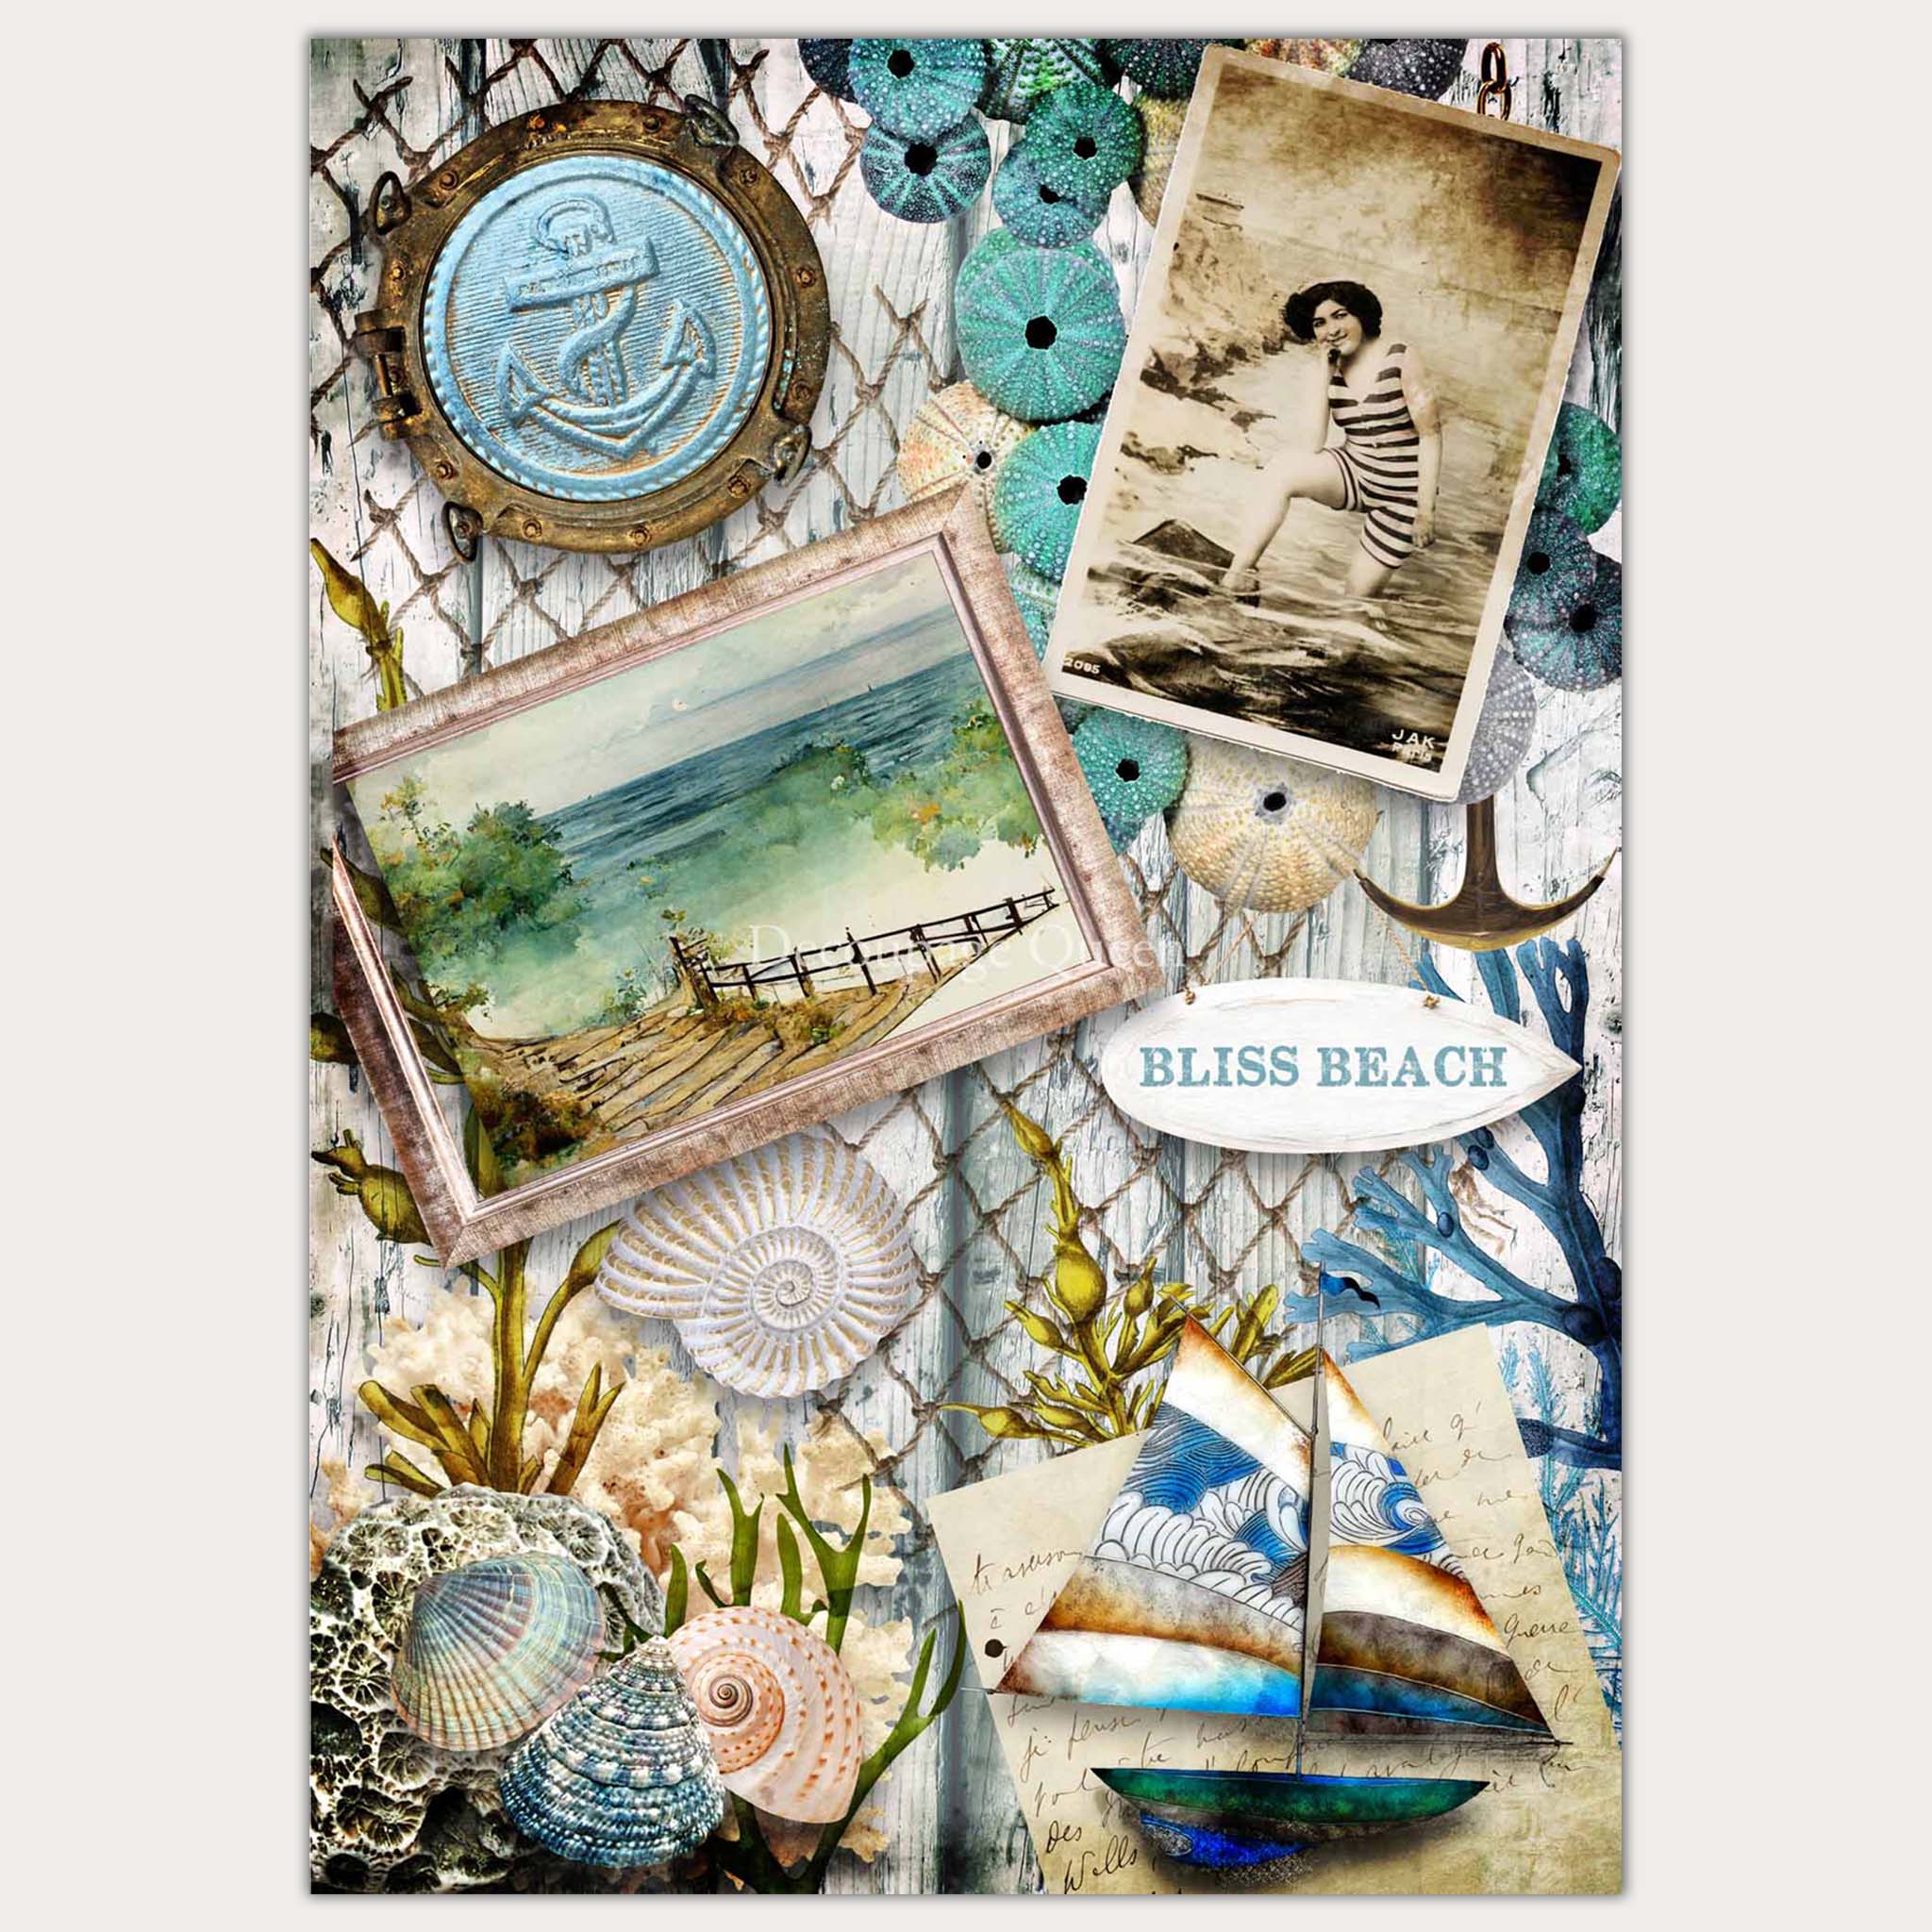 A4 rice paper design that features a collage of beach items and photos against a wood and netting background. White borders surround the paper.